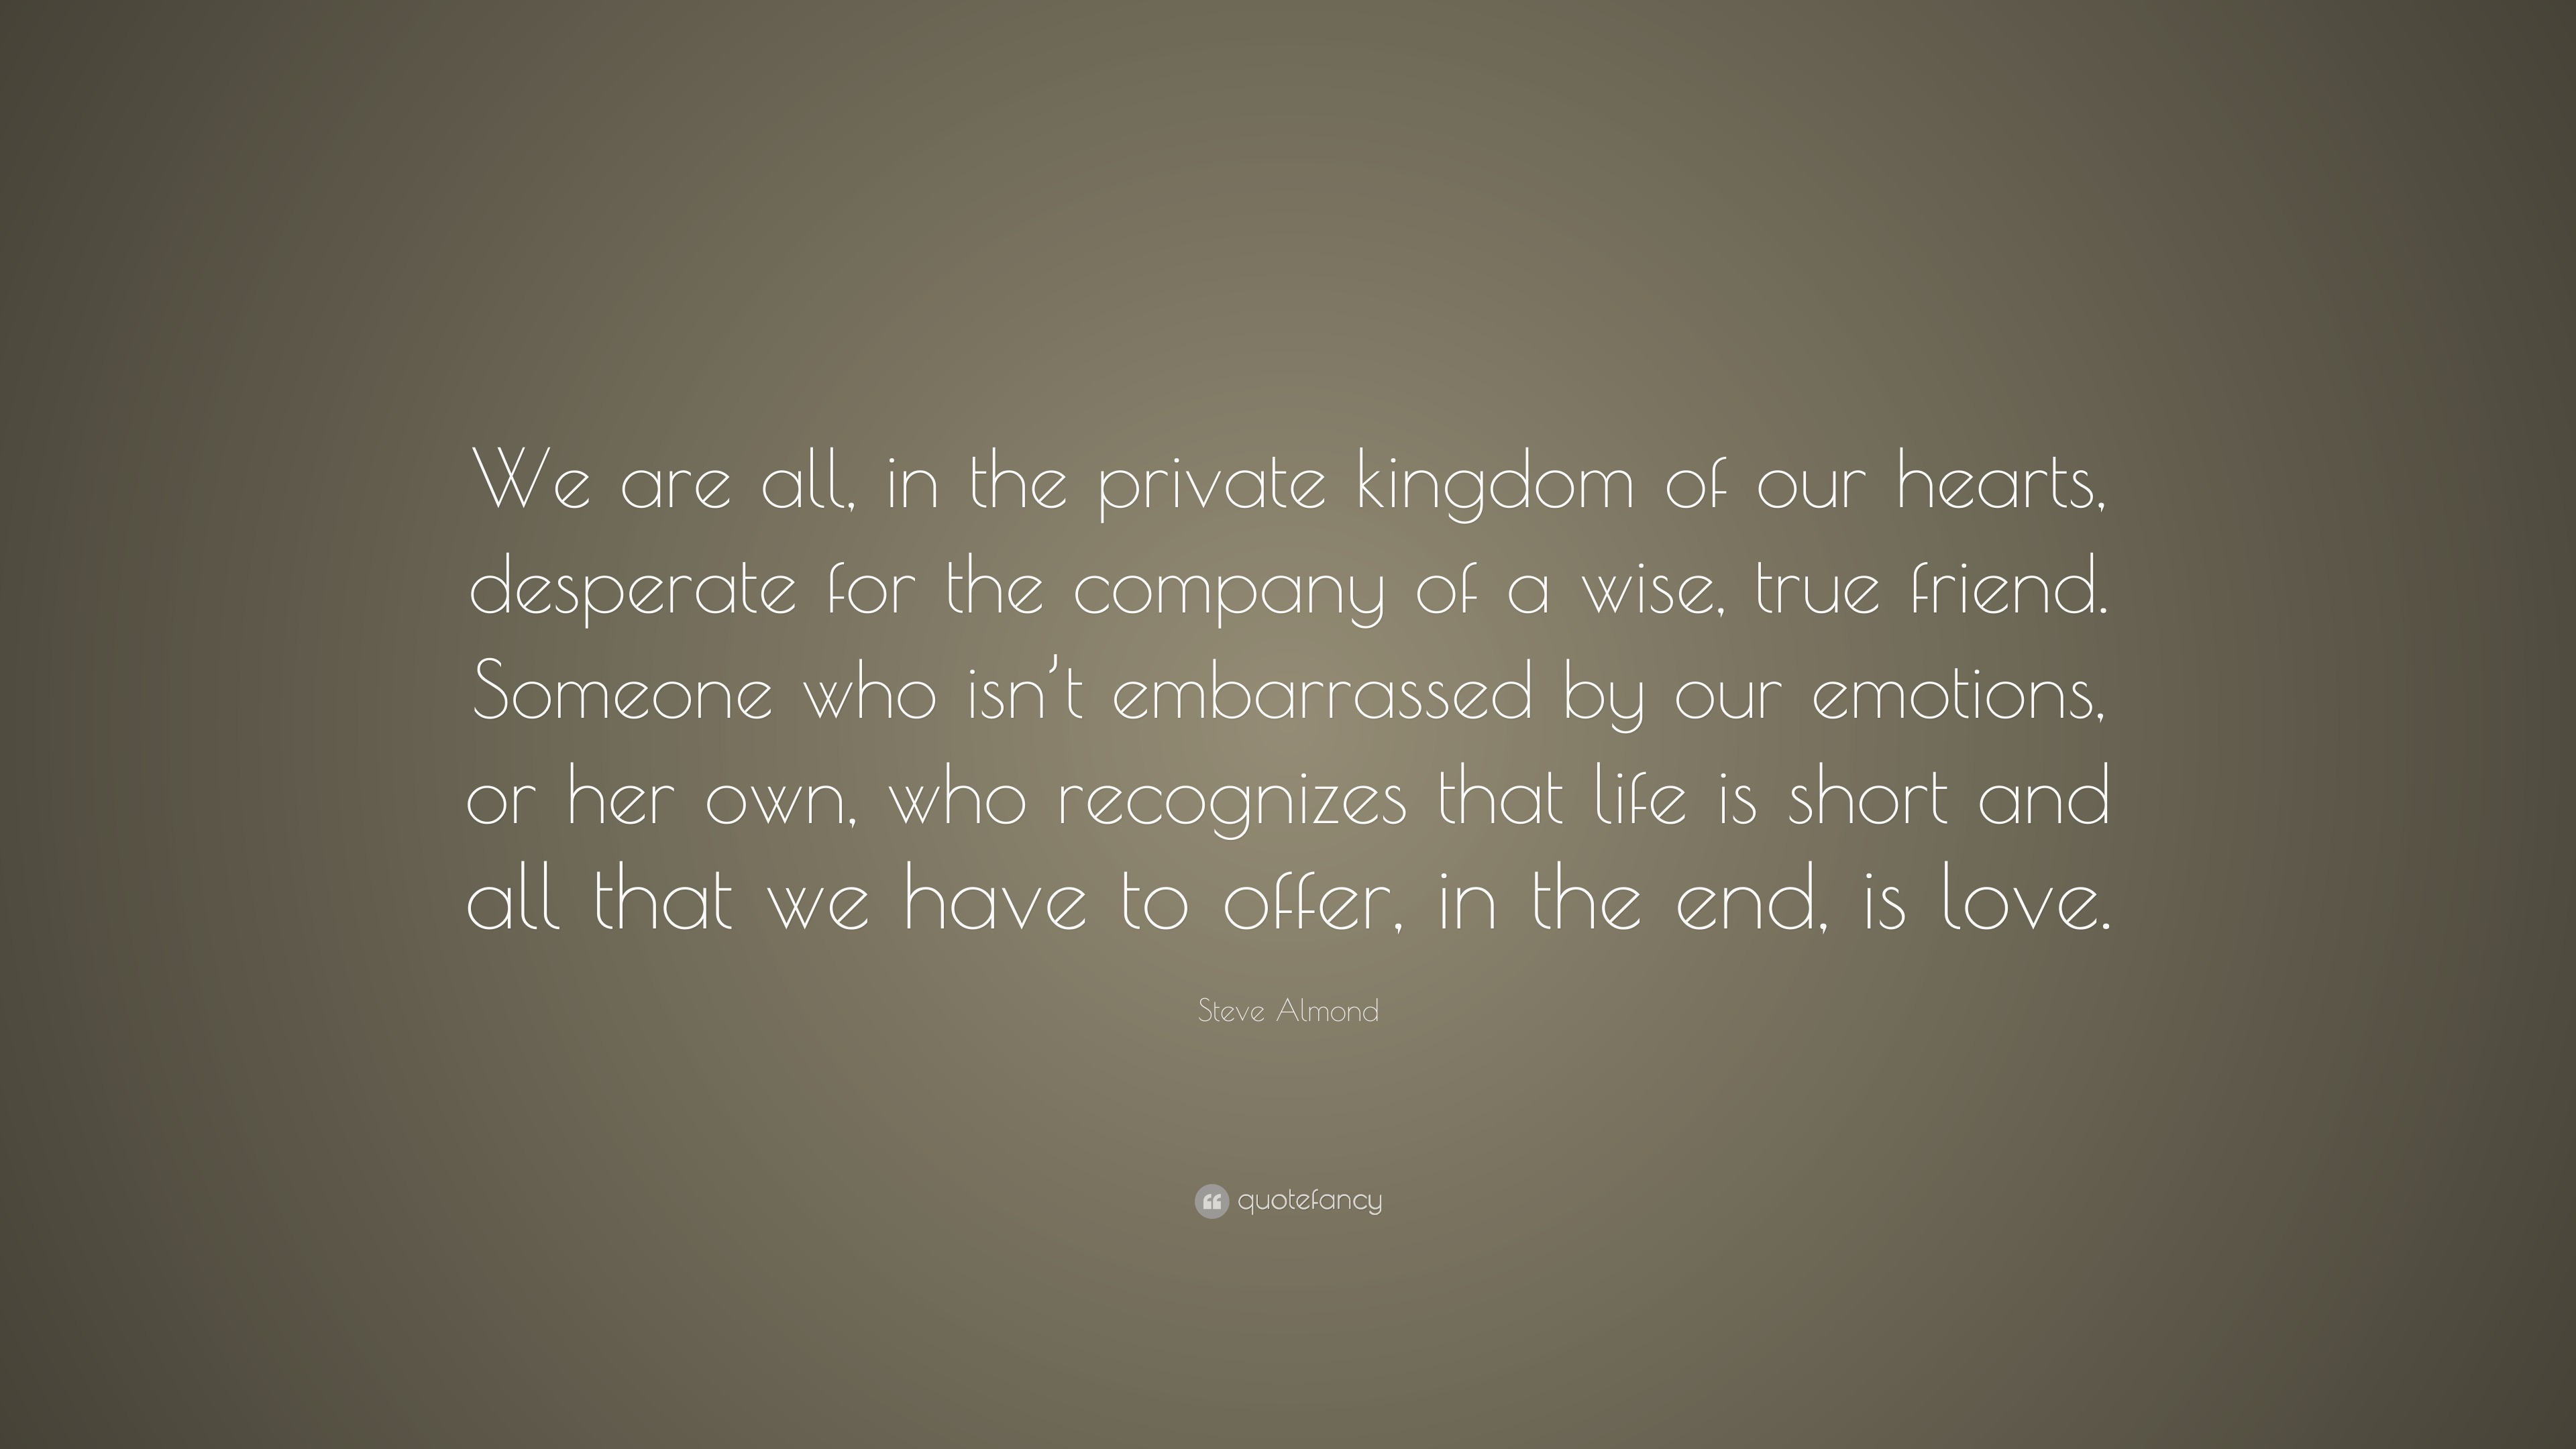 Steve Almond Quote “We are all in the private kingdom of our hearts